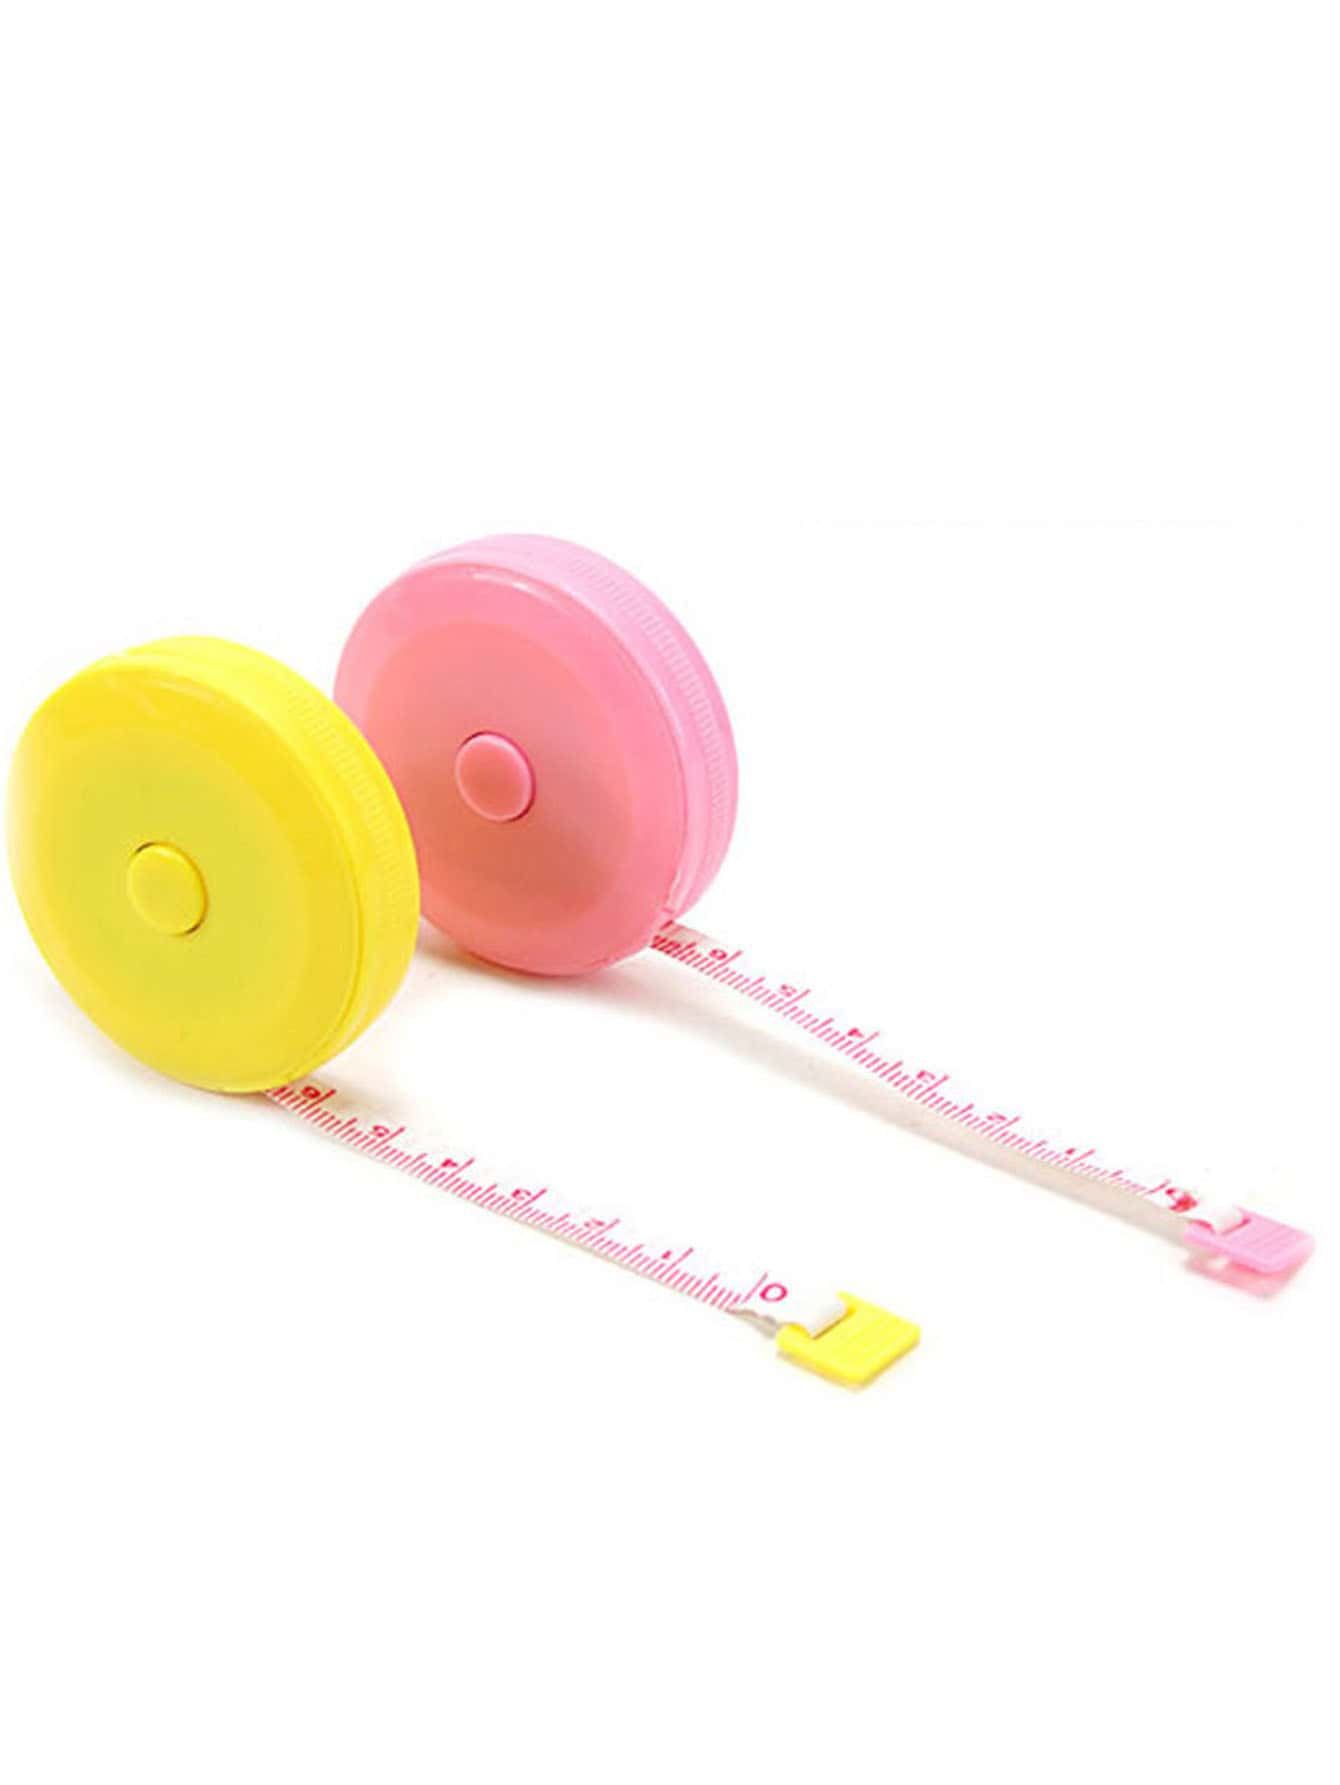 1pc 1.5M Random Mini ABS Tape Measure,Cute Solid Portable Band Tape For Sewing